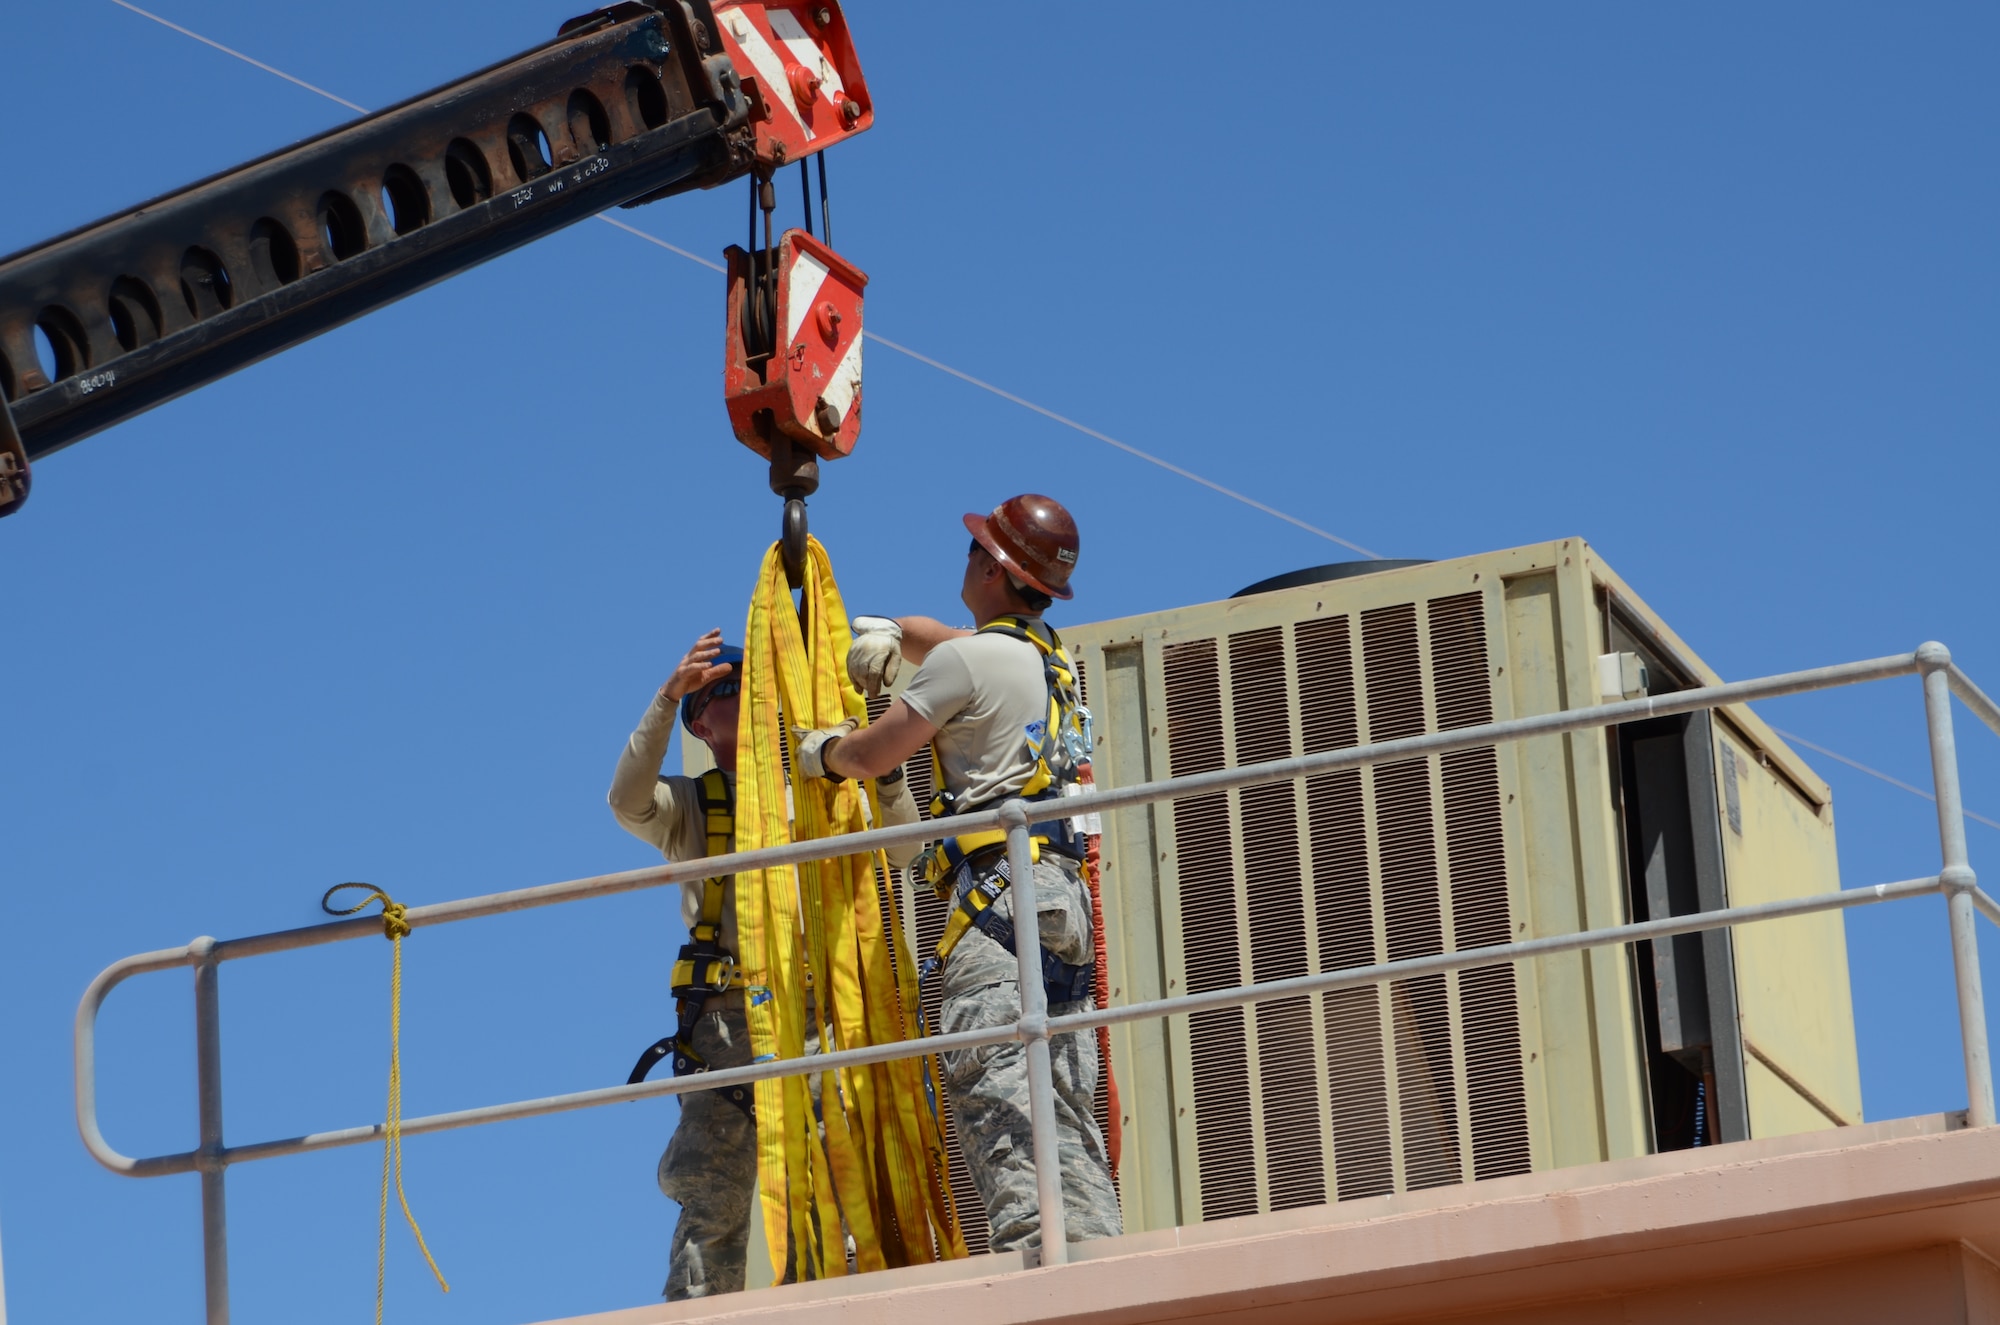 Master Sgt. Jeffery Dornin, a native of Keysport Ill., and Master Sgt. Randy Frantz, a native of Troy Ill., both members of the 126th Civil Engineer Squadron, attached to the 126th Air Refueling Wing, Illinois Air National Guard, prepare to hook up an old air conditioner to a crane to remove it from the roof of a building at Holt Naval Communication Station, Western Australia, Sep. 5, 2013. The air conditioner was removed as part of Operation C-Band Radar Pedestal And Structural NE NCS Holt-Western Australia where multiple Air National Guard units were completing a joint mission. (Air National Guard photo by Airman 1st Class Elise Stout) 